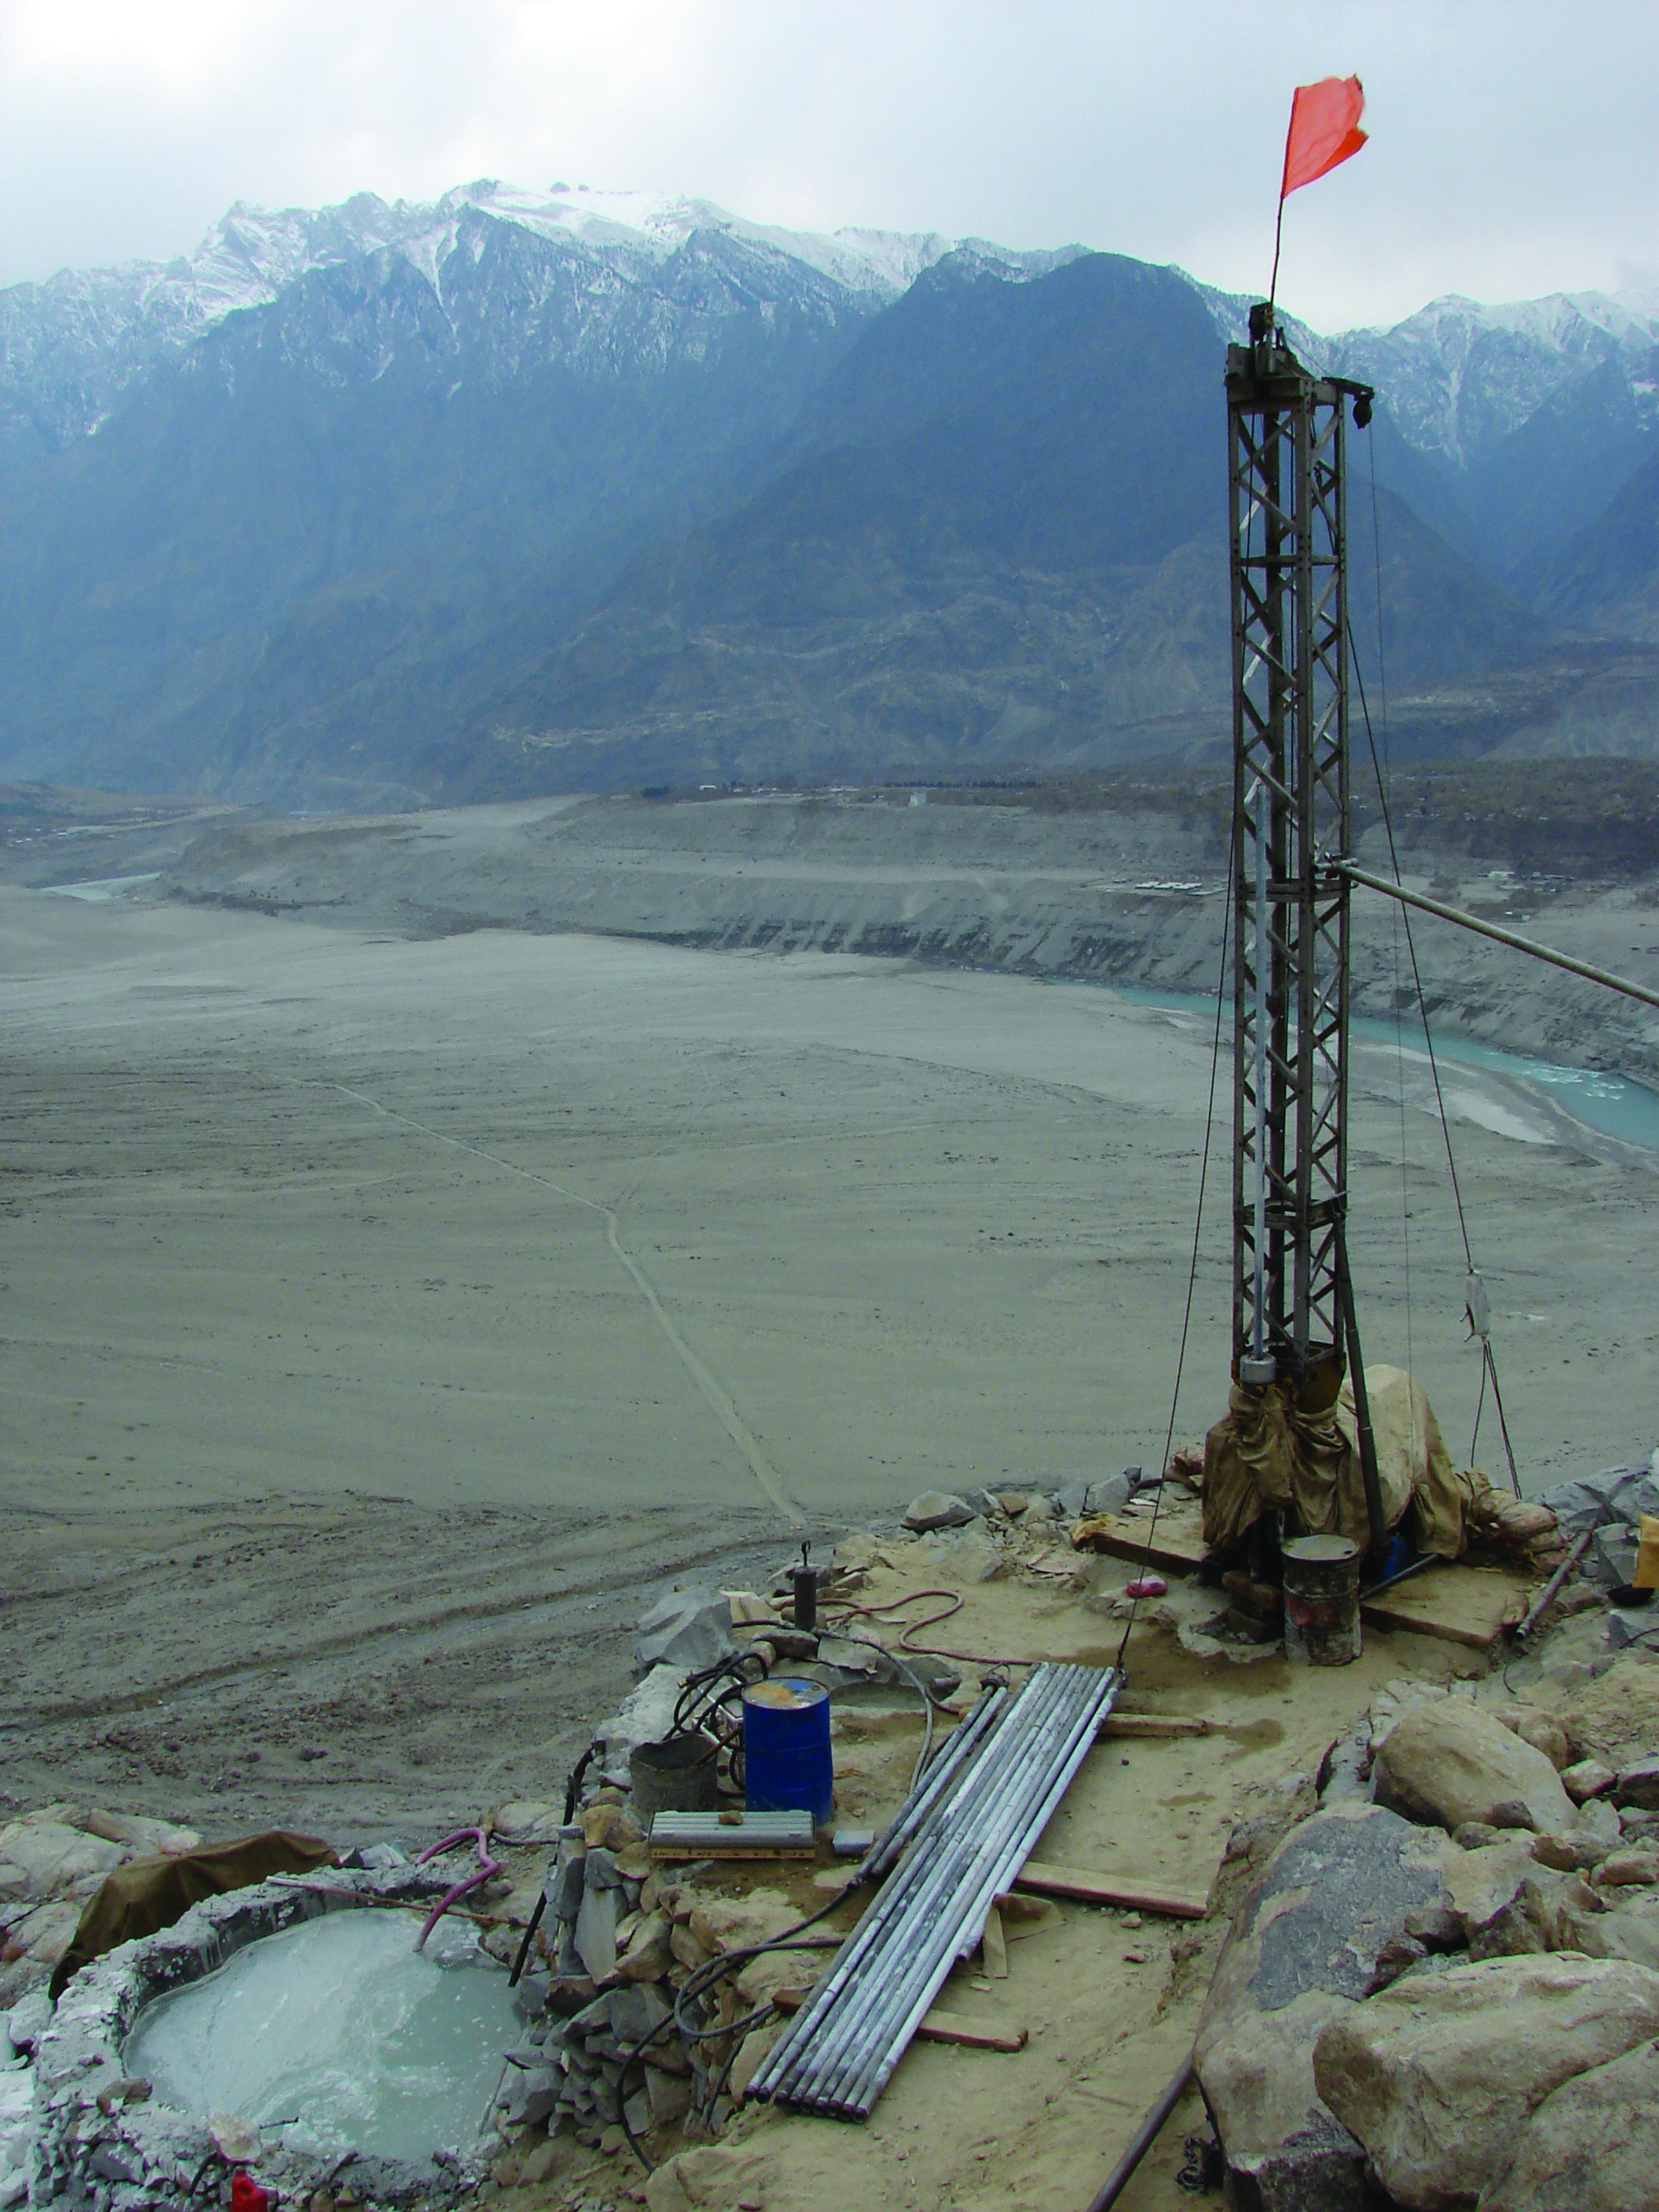 Shot of the construction site with mountains in the background